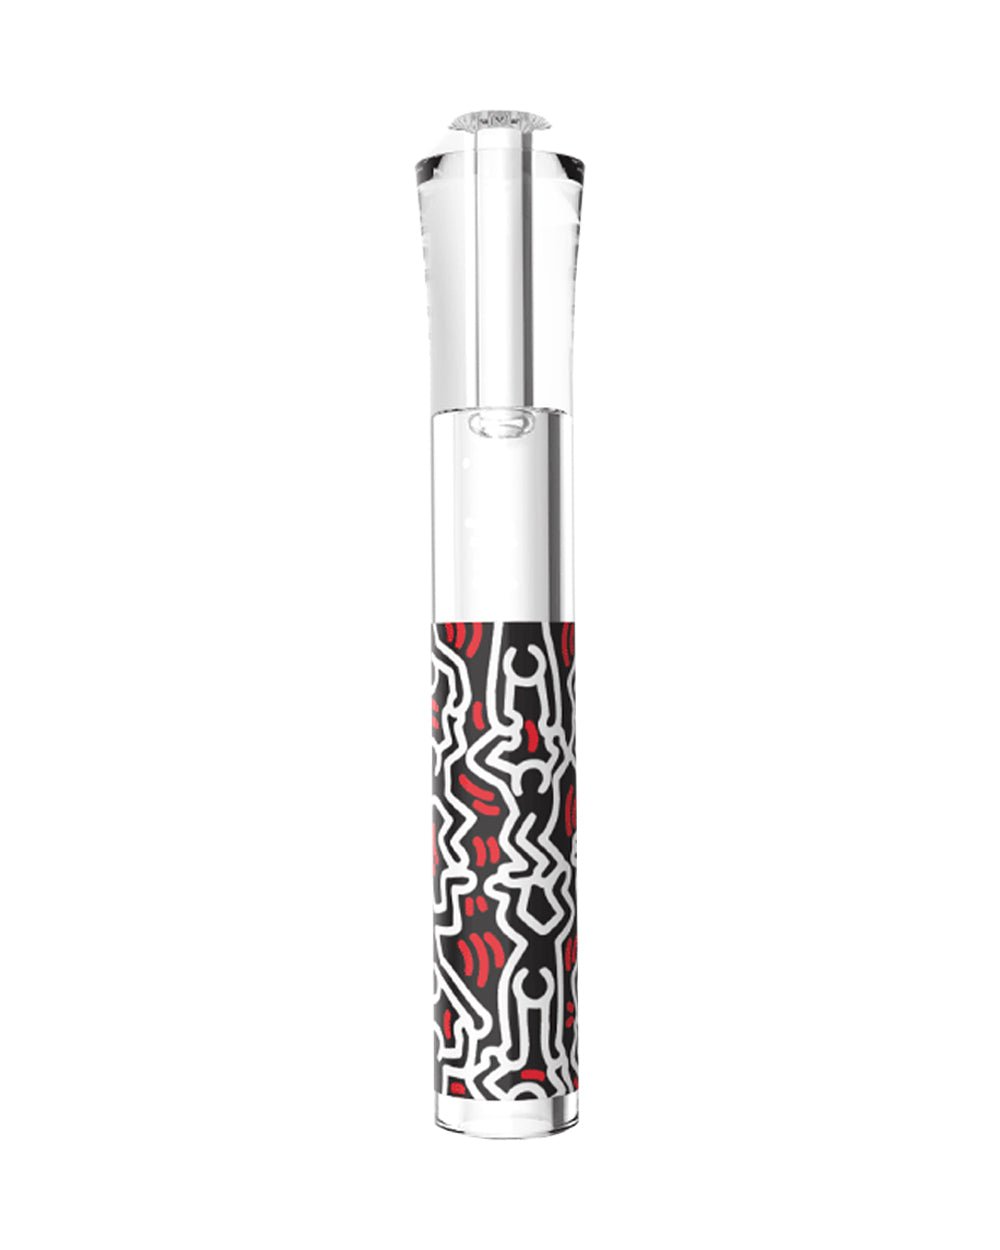 Keith Haring | Glass Taster Chillum Hand Pipe | 3in Long - Glass - Black & White - 11